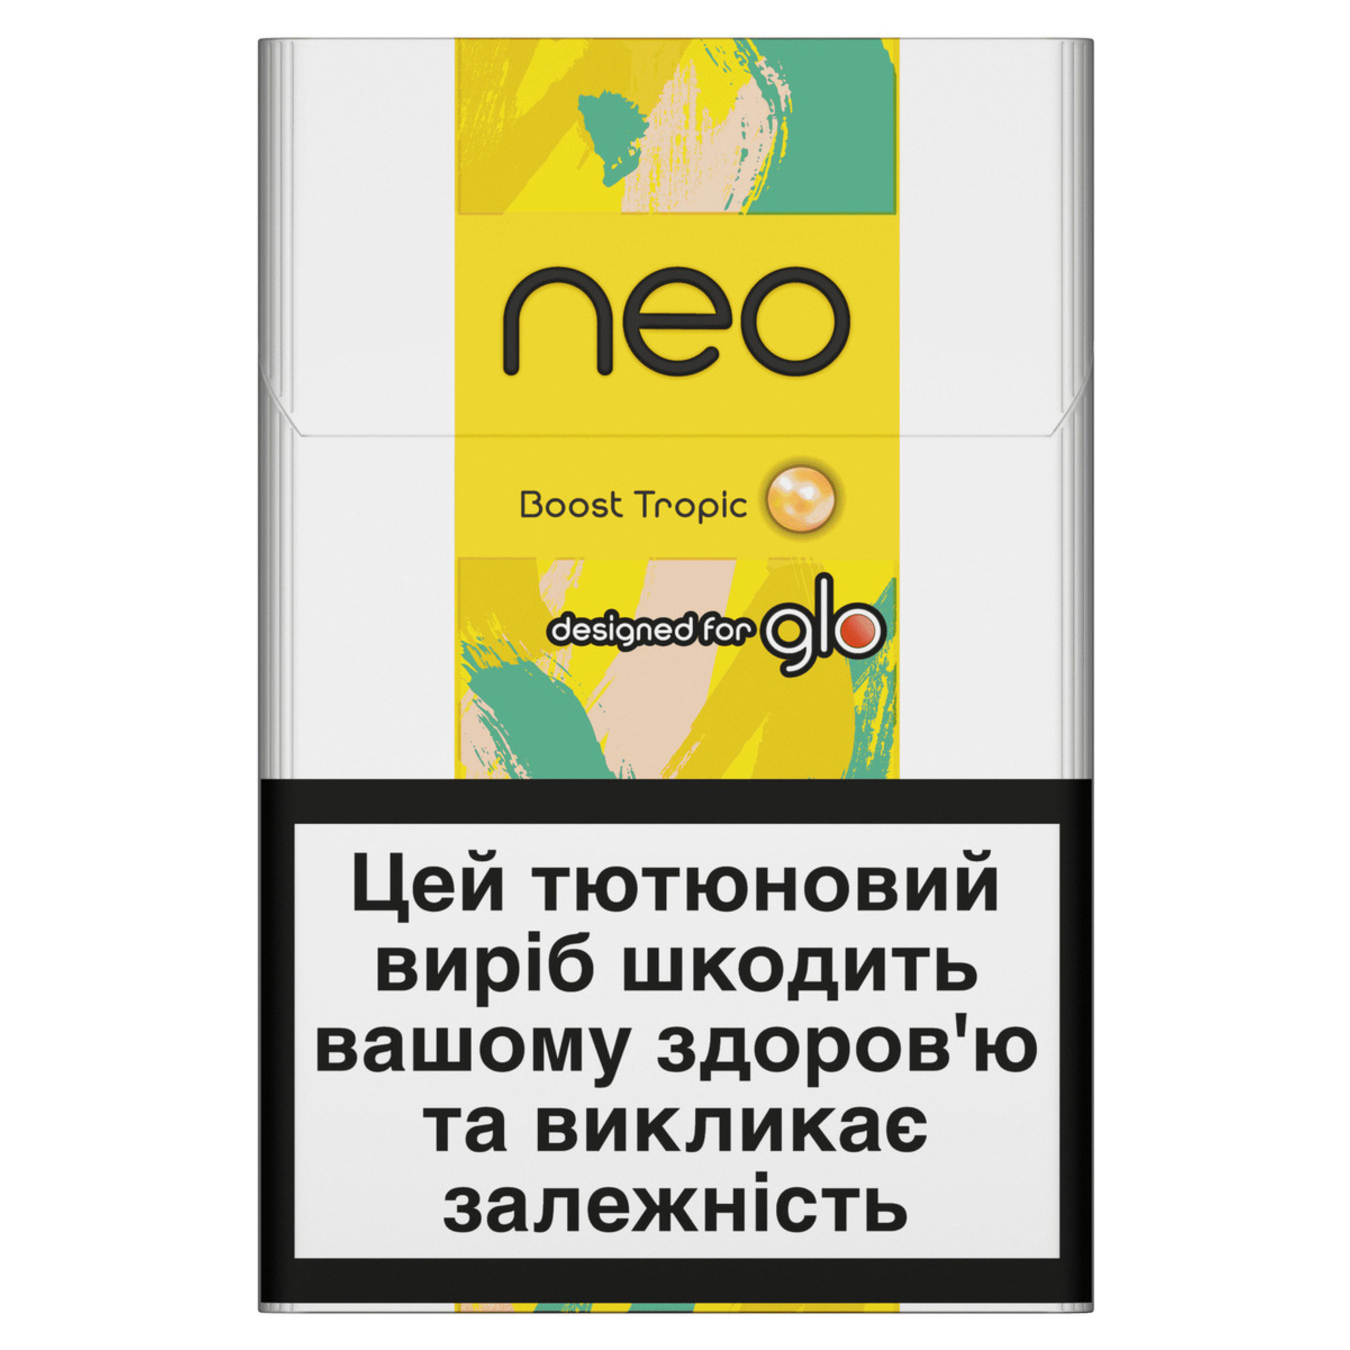 Sticks Neo Sticks Boost Tropic 20pcs (the price is indicated without excise tax)